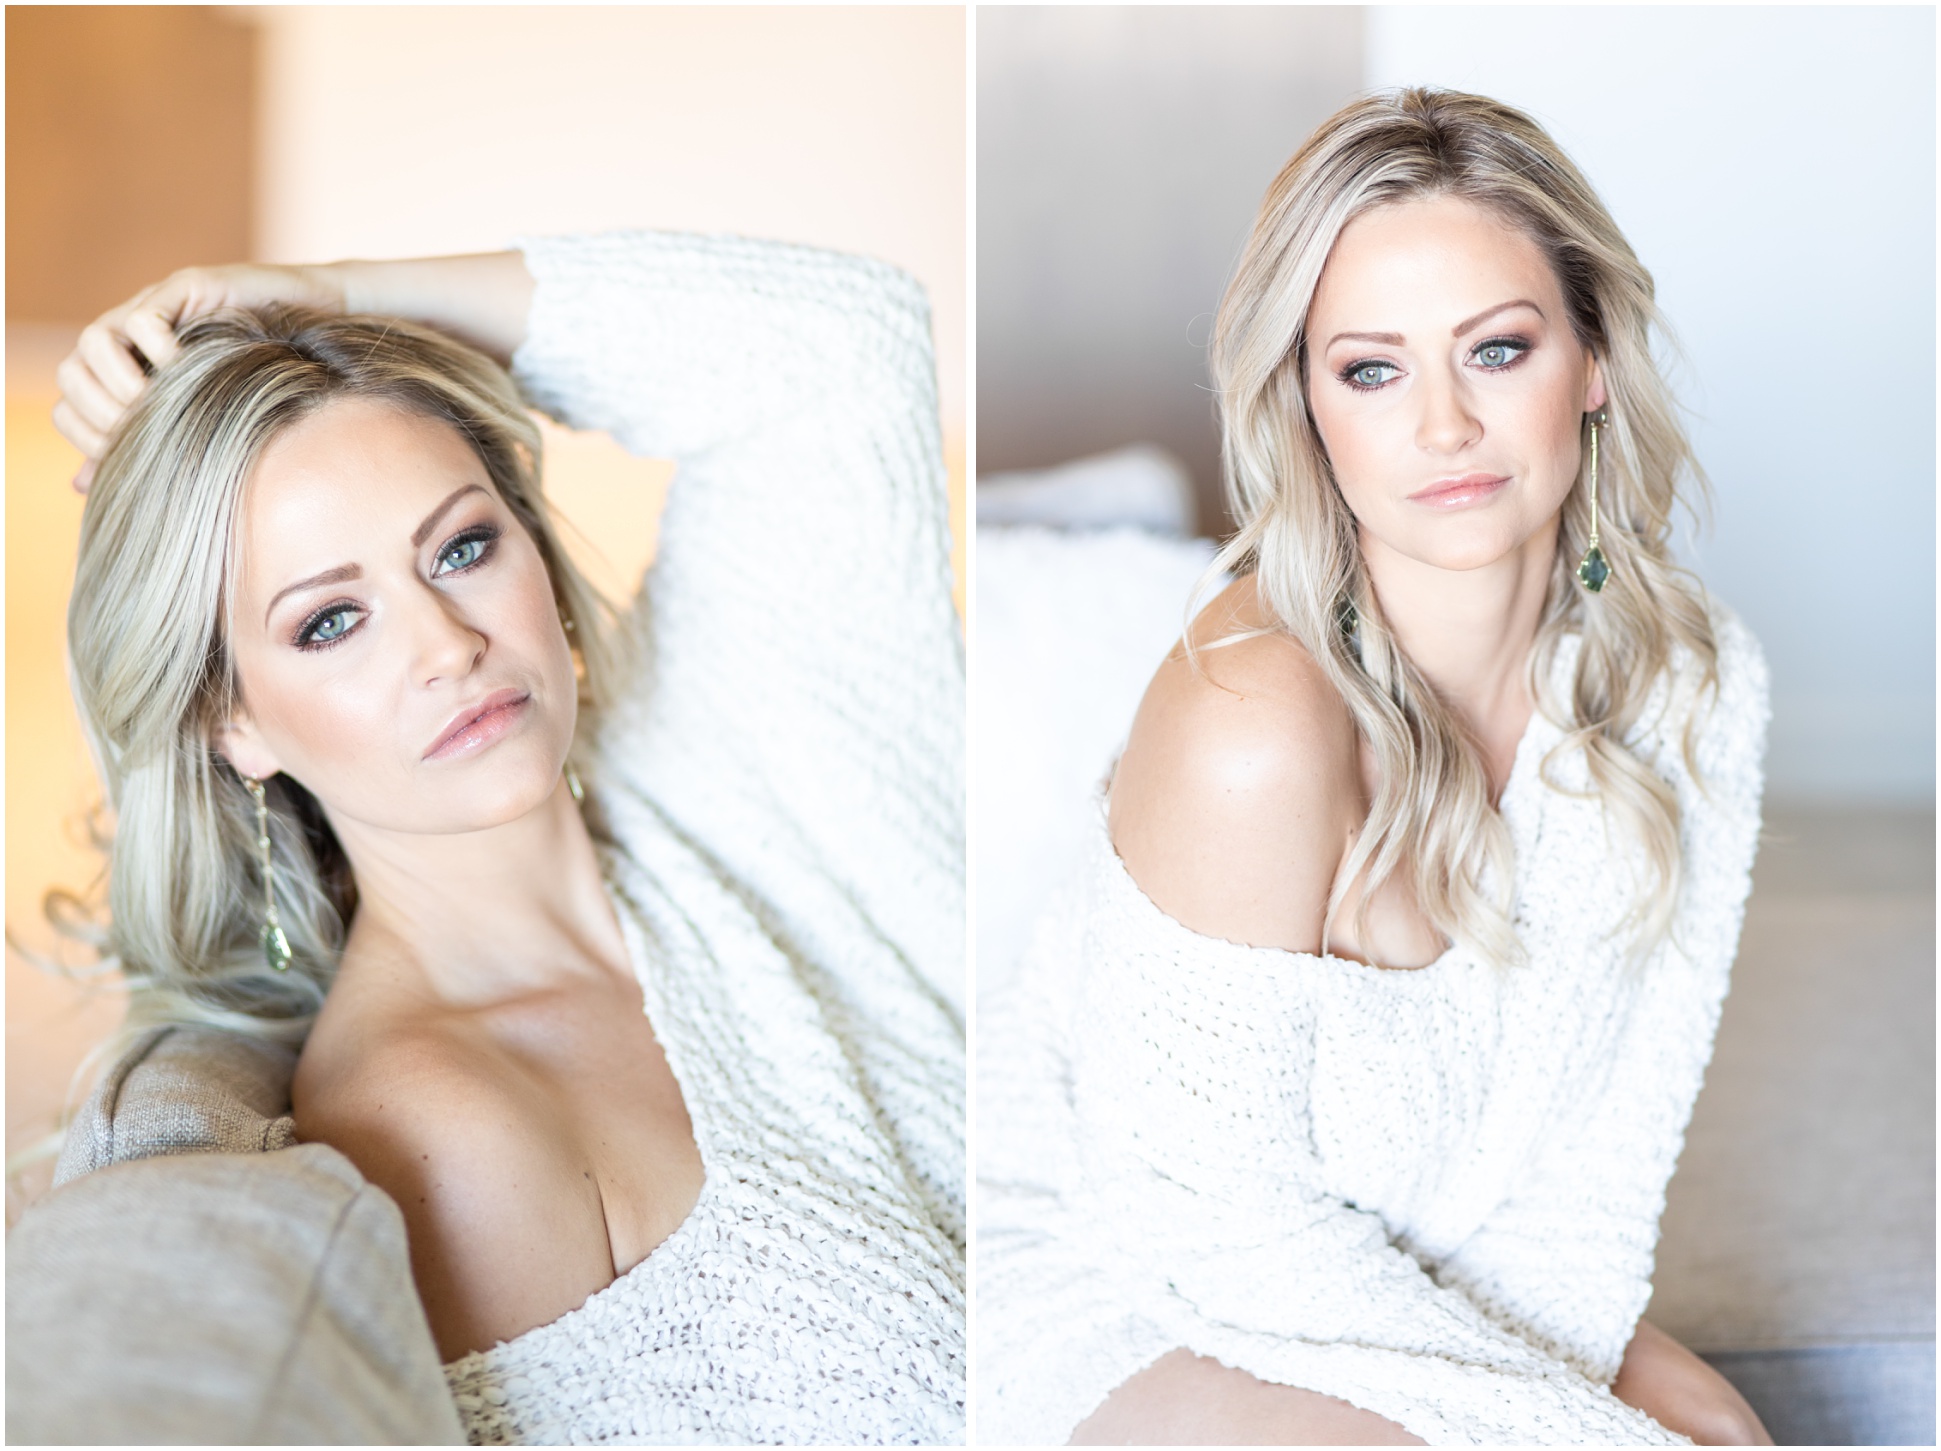 Heather Godby in sweater and lingerie for her tranquility boudoir portrait photography session with MaeWood Photography at Civana Carefree